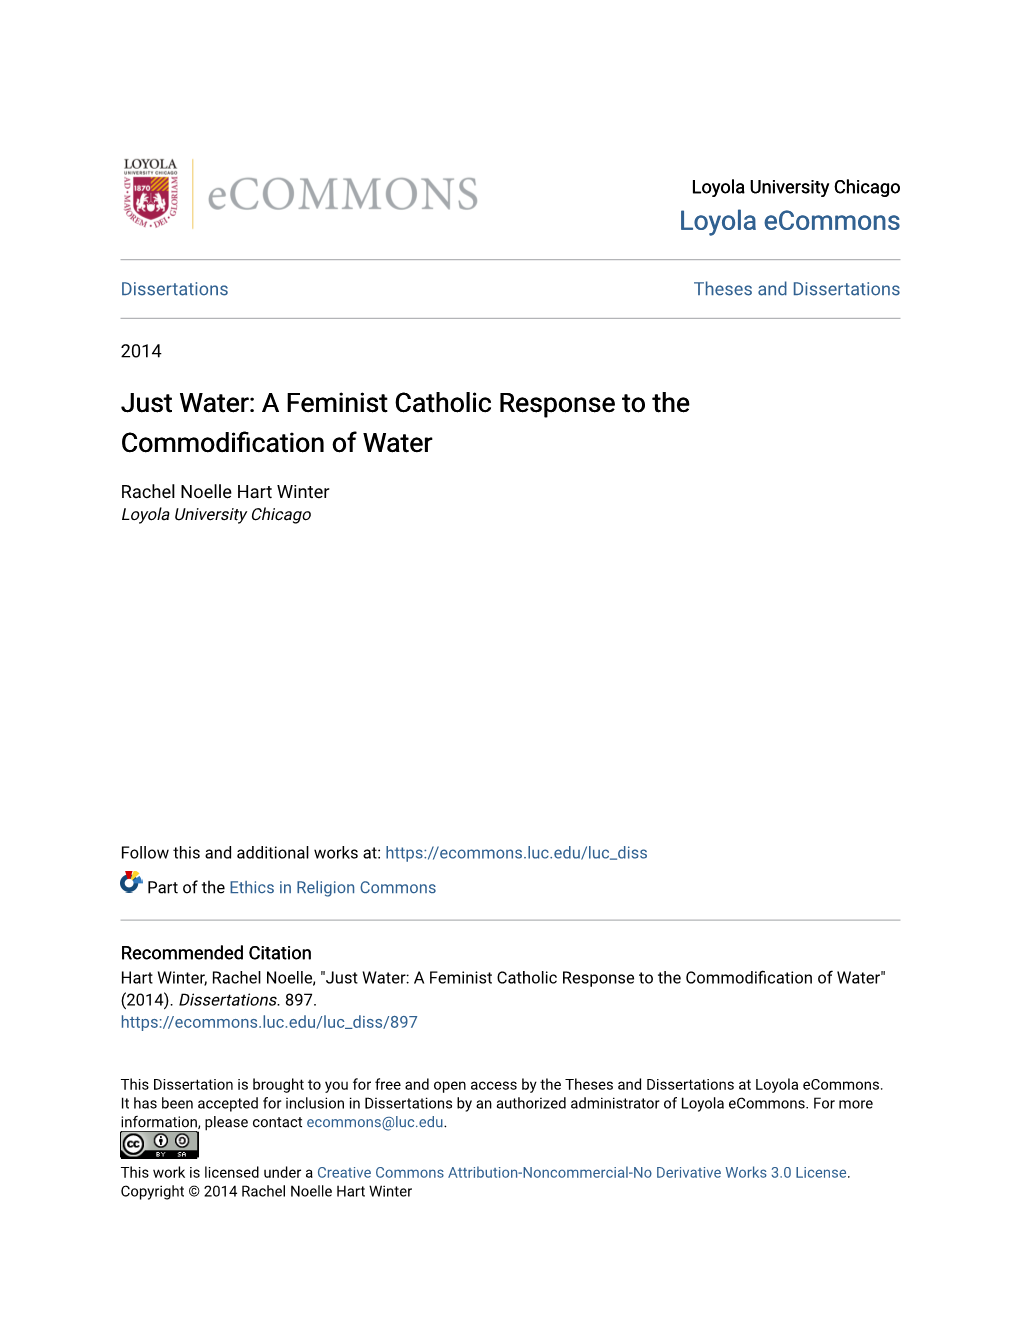 A Feminist Catholic Response to the Commodification of Water